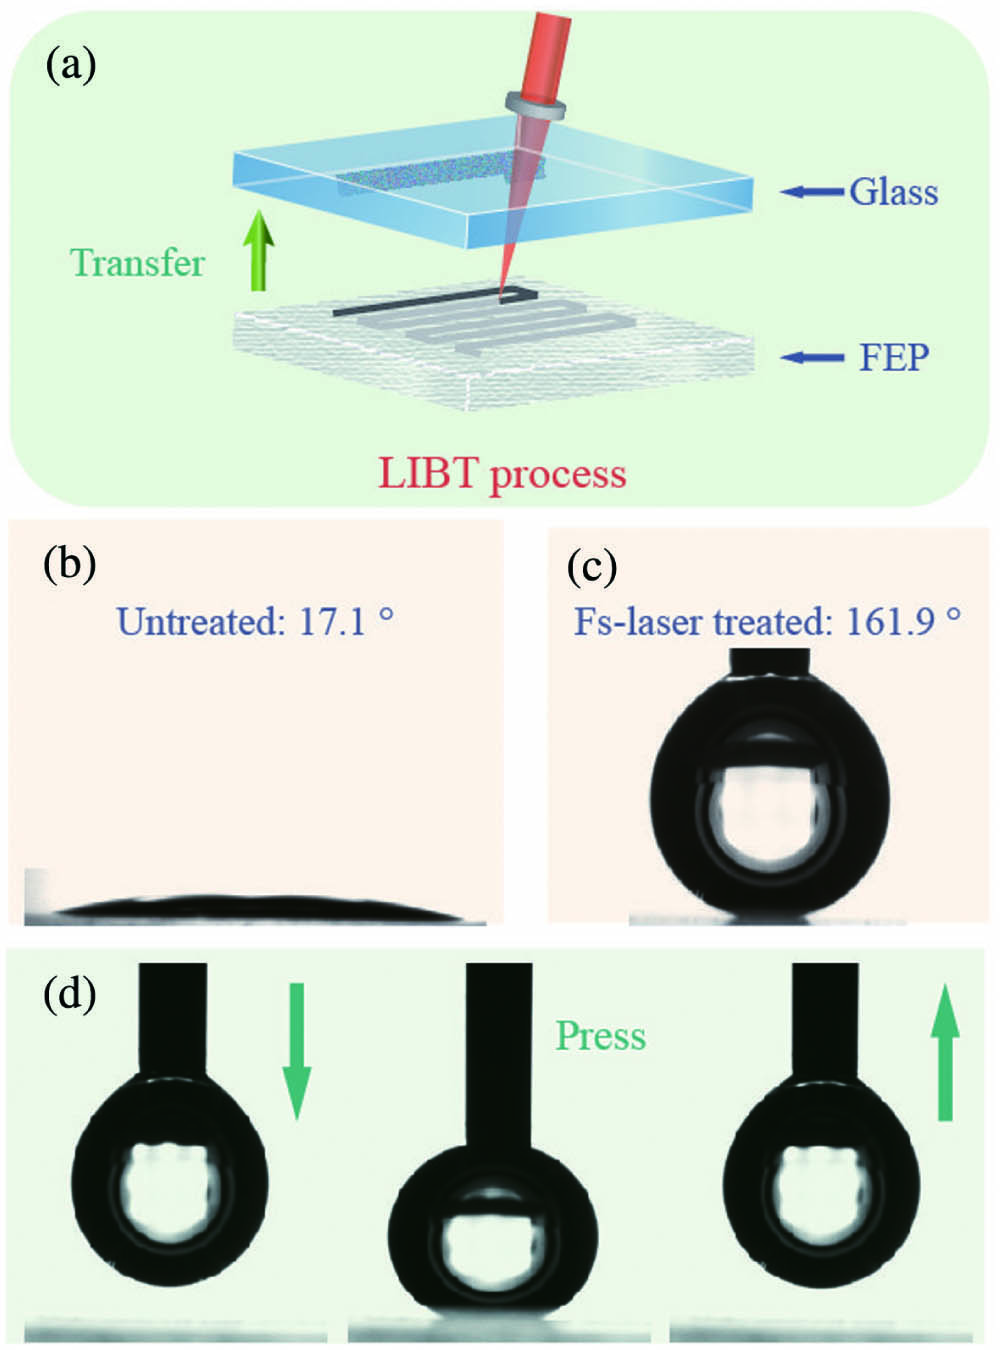 (a) Schematic diagram of LIBT process; the side view of a 5 µL pure water droplet on the glass surface (b) before and (c) after the LIBT process; (d) the surface repelled a 5 µL droplet (laser power: 0.8 W; scanning interval: 10 µm). The green arrows represent the moving direction of the needle.